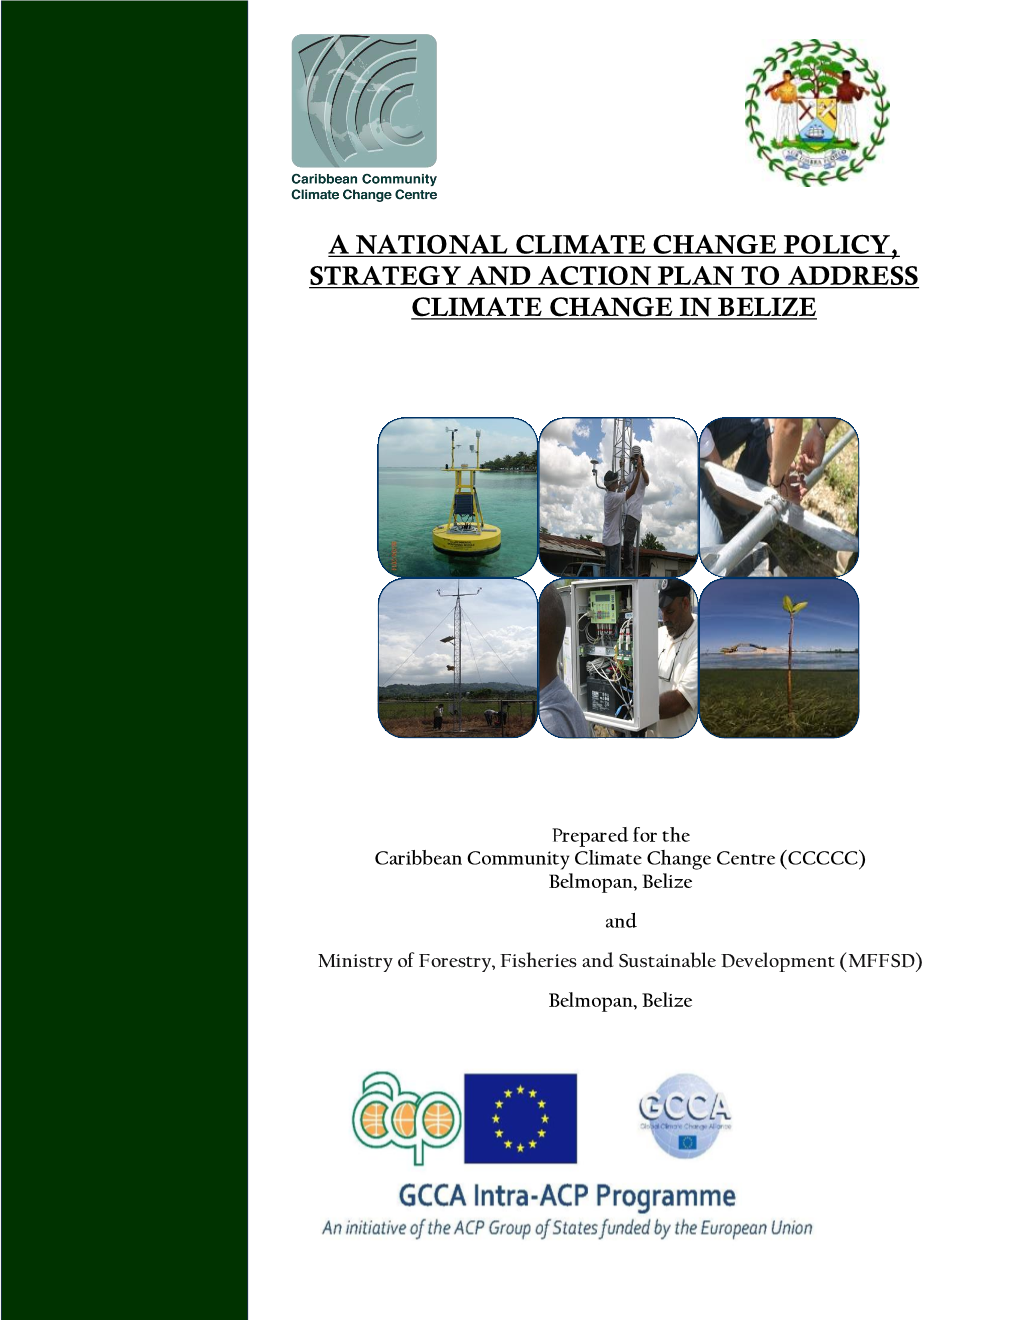 National Climate Change Policy, Strategy and Action Plan to Address Climate Change in Belize